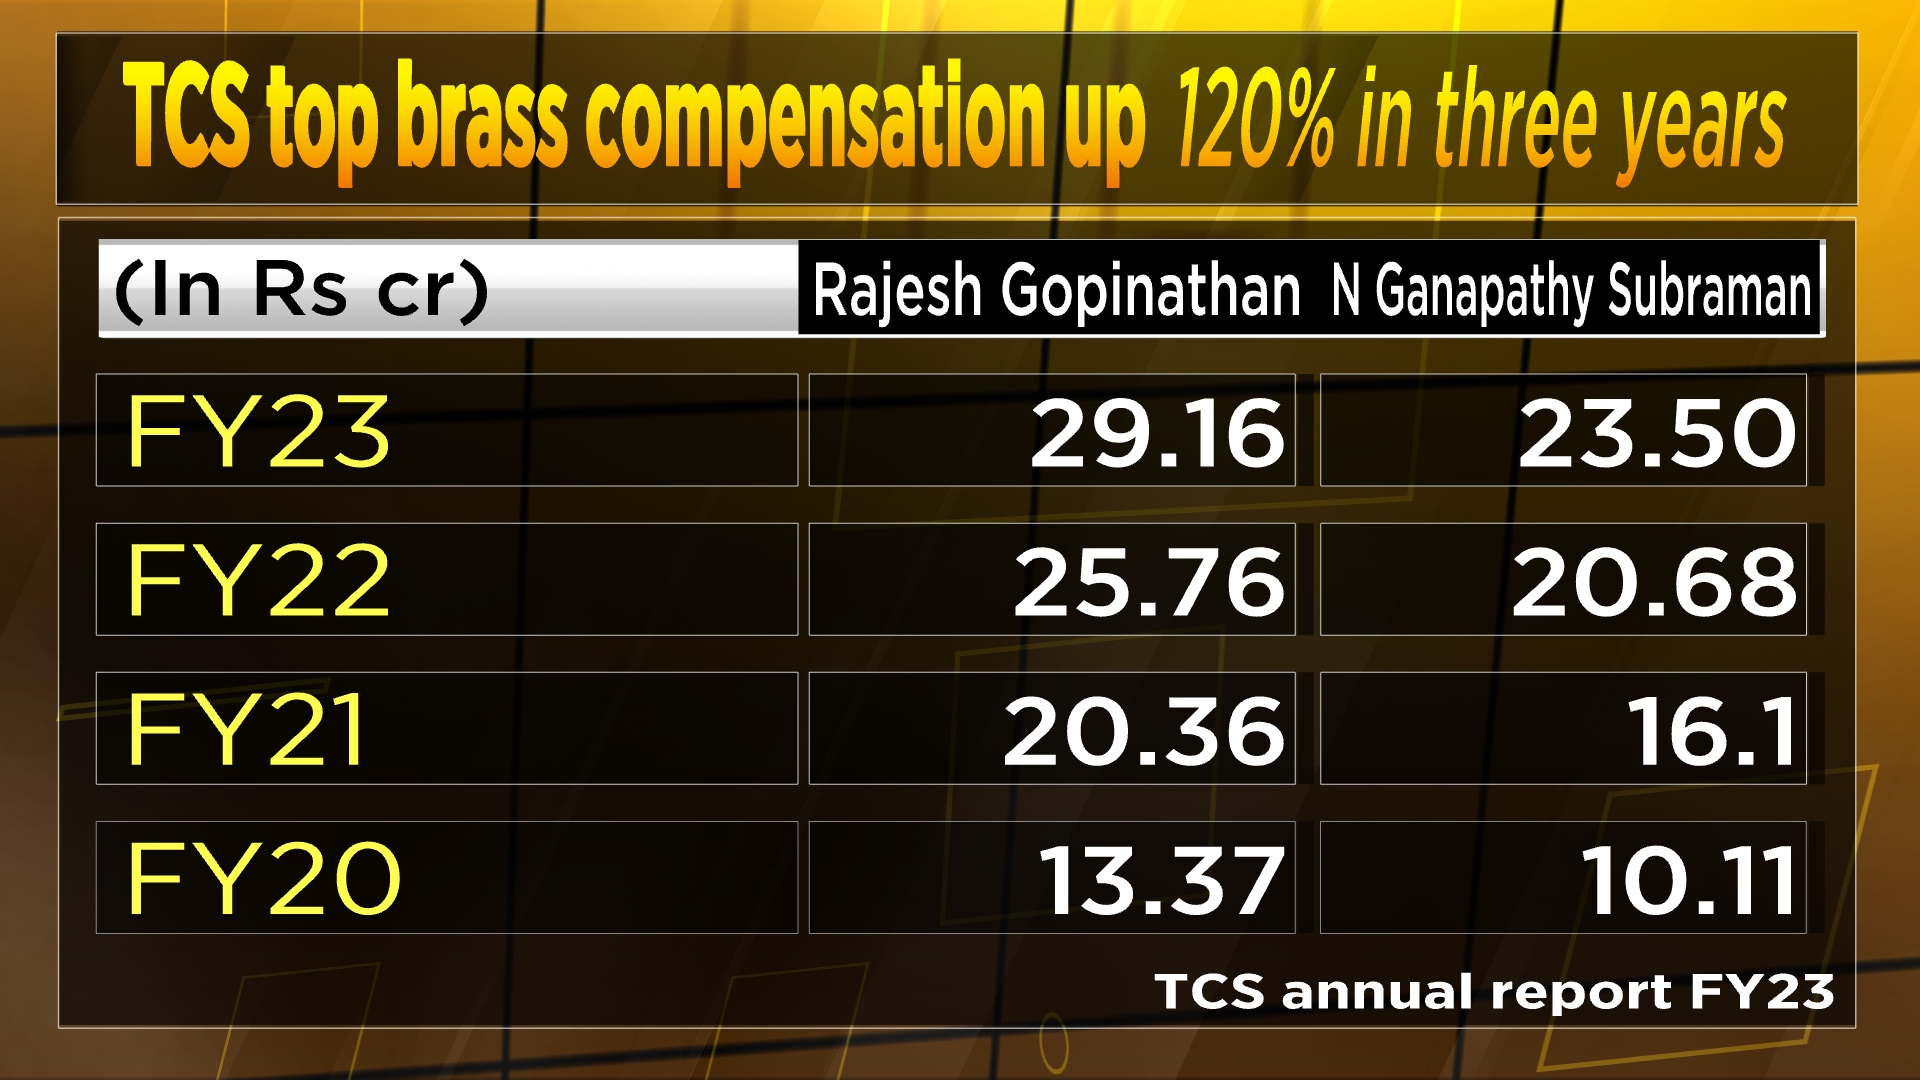 TCS COO Salary: TCS top brass salary jumps 120% in three years